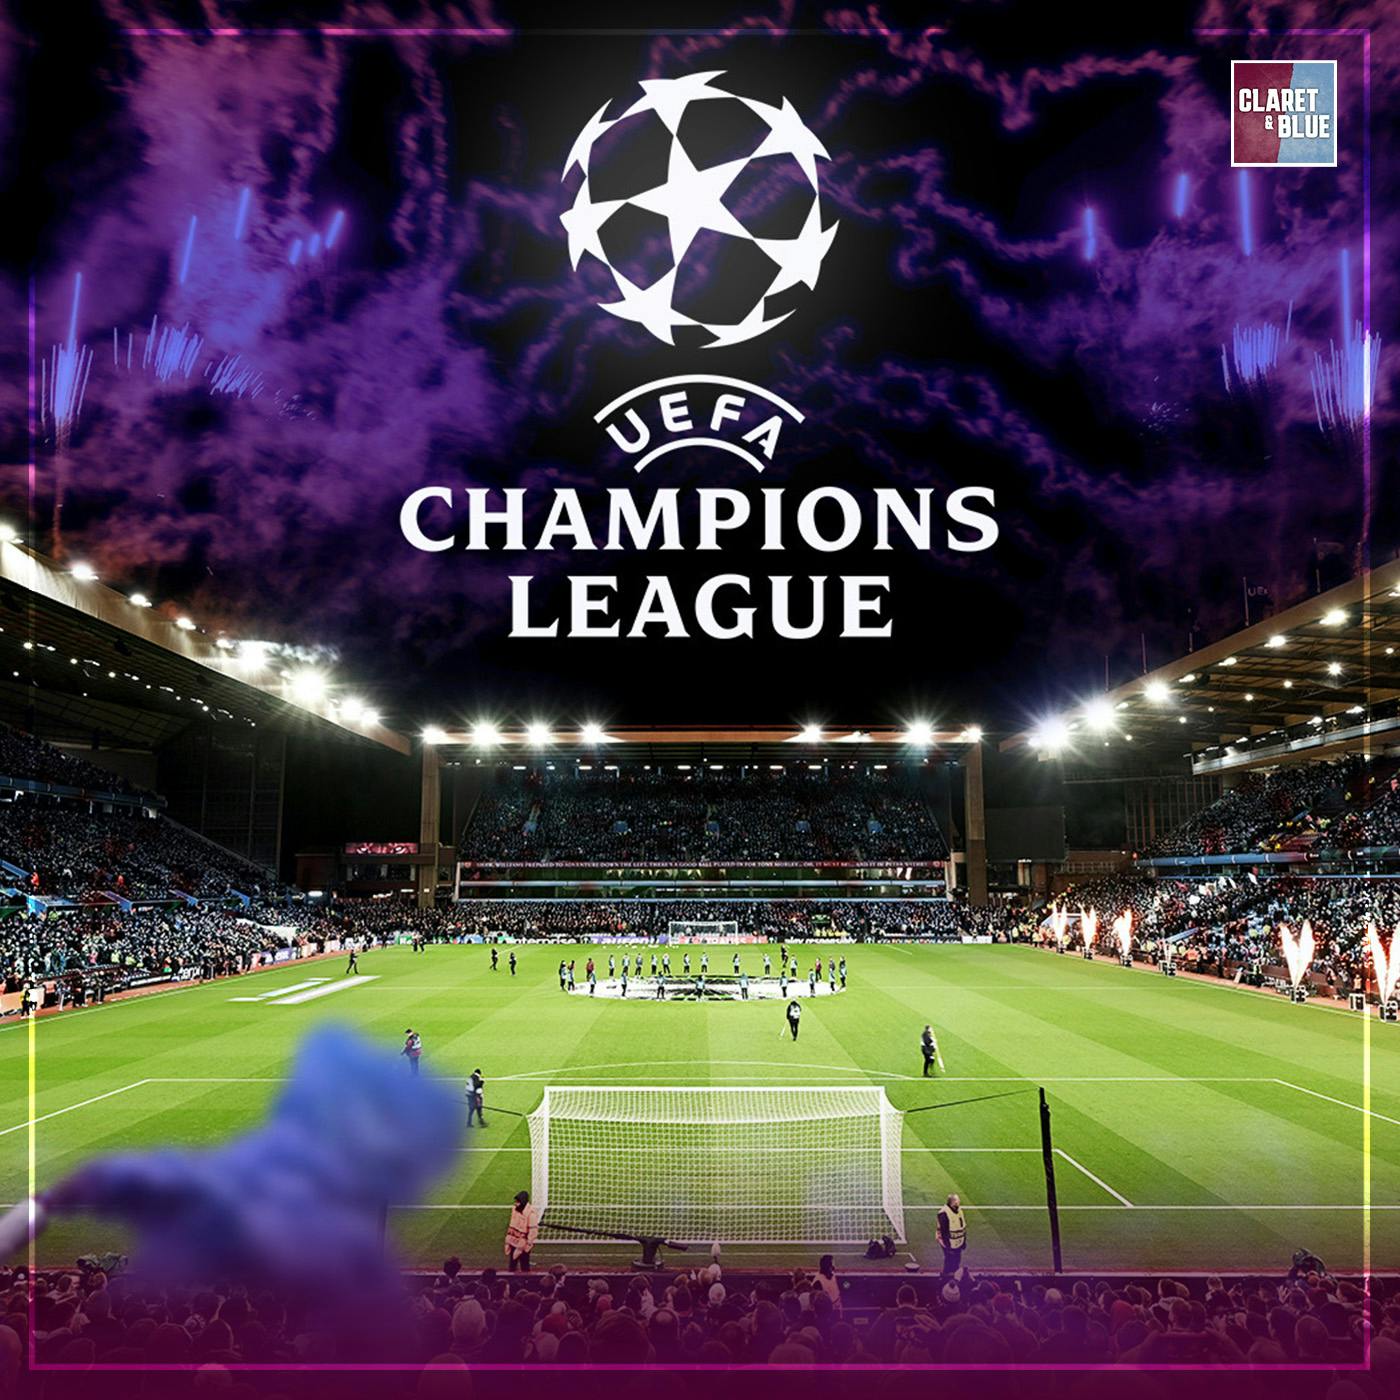 ASTON VILLA HAVE QUALIFIED FOR THE CHAMPIONS LEAGUE